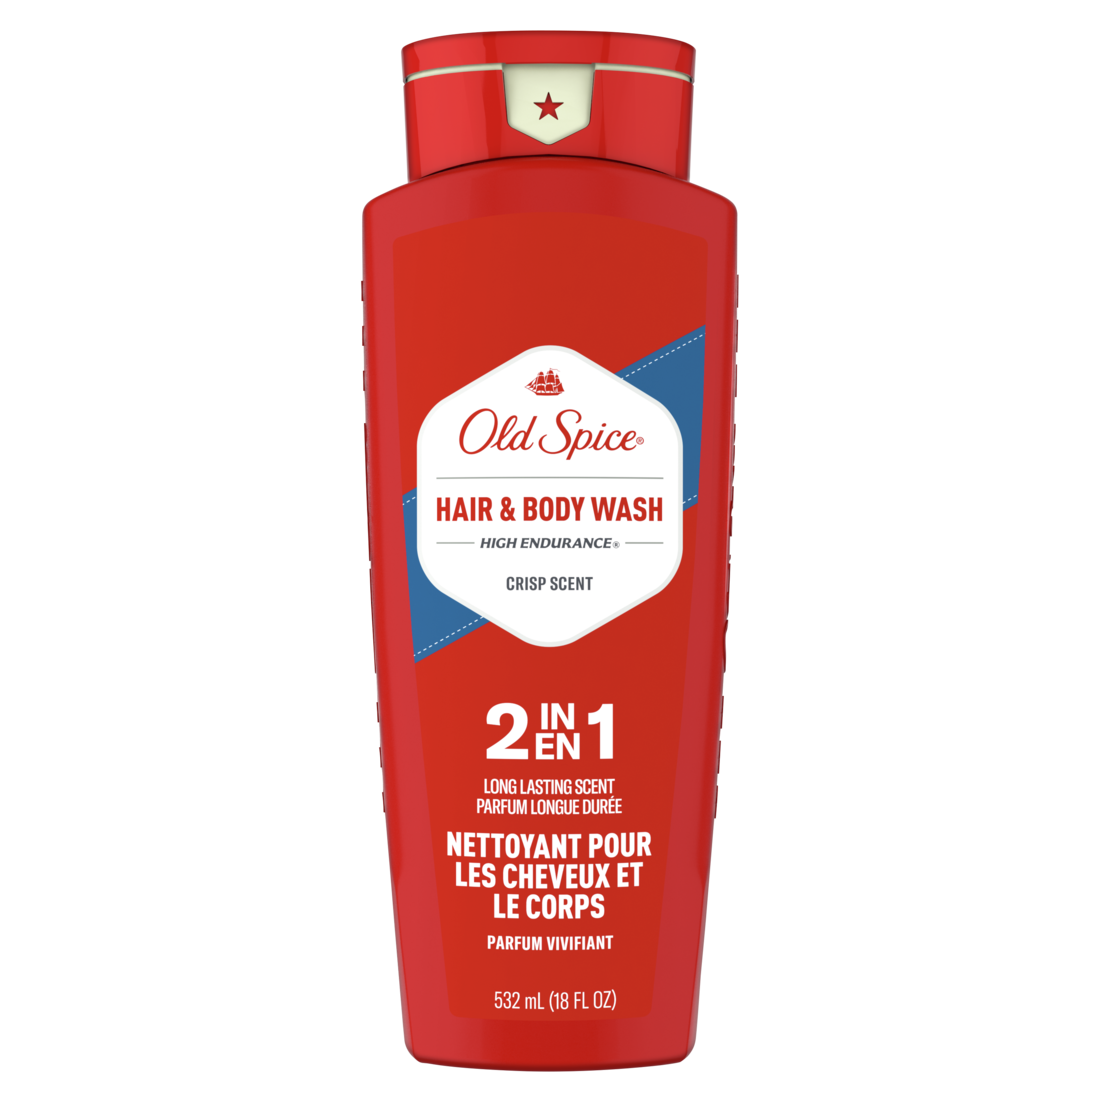 Old Spice HE 2 in 1 Hair and Body Wash - 18oz/4pk